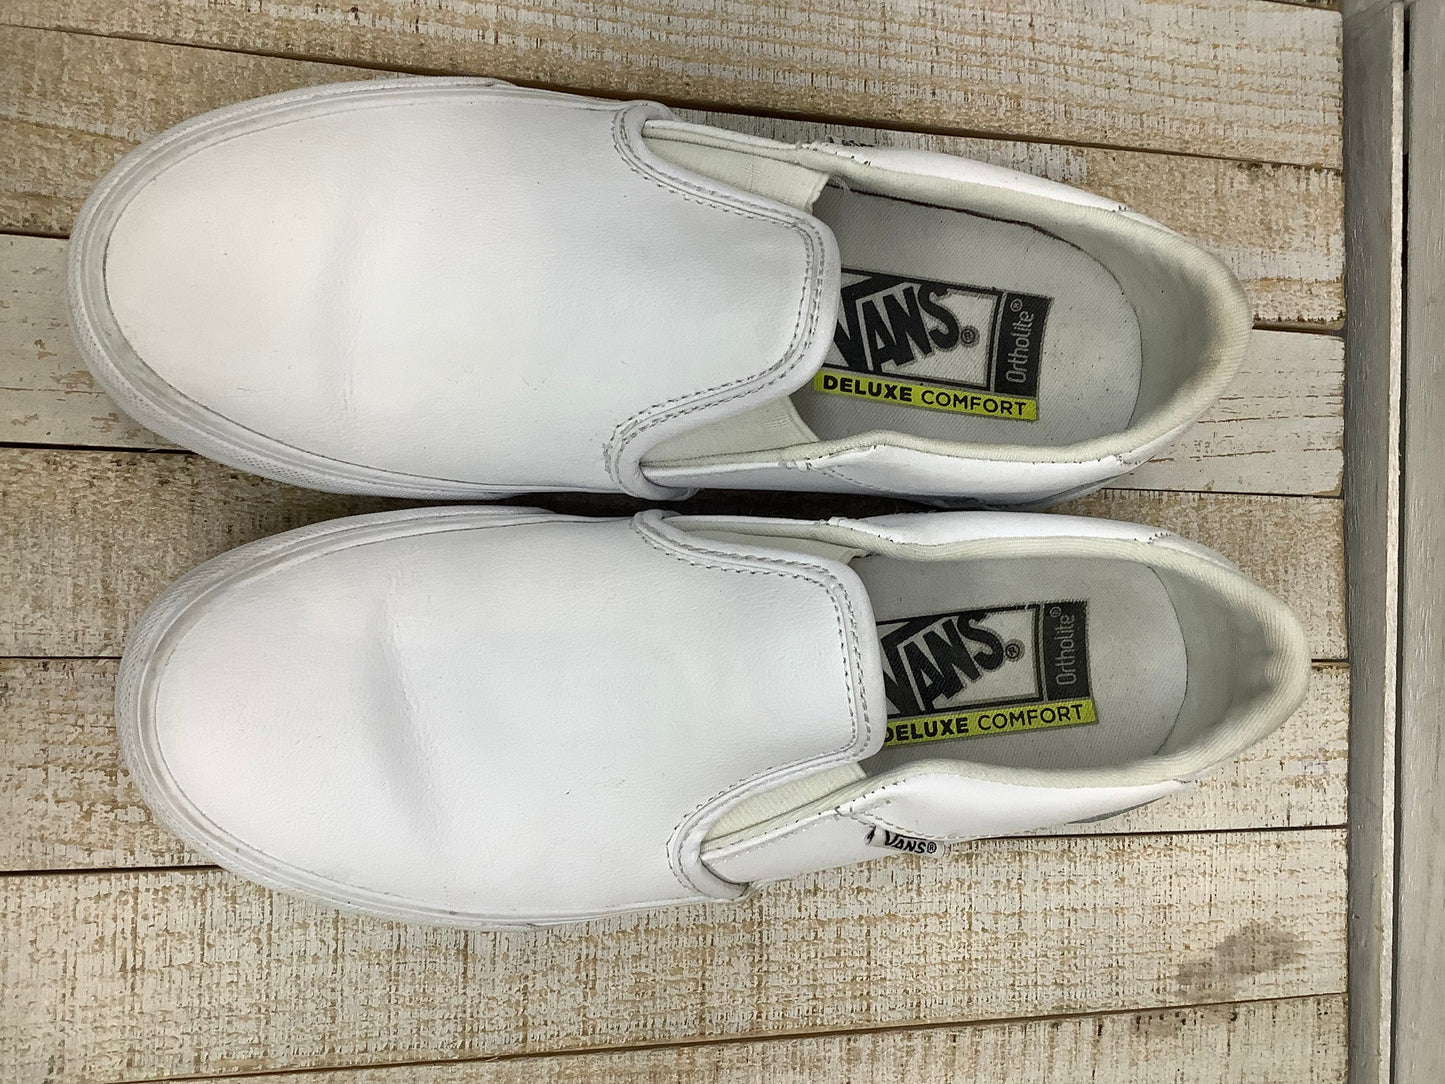 White Shoes Sneakers Vans, Size 8.5